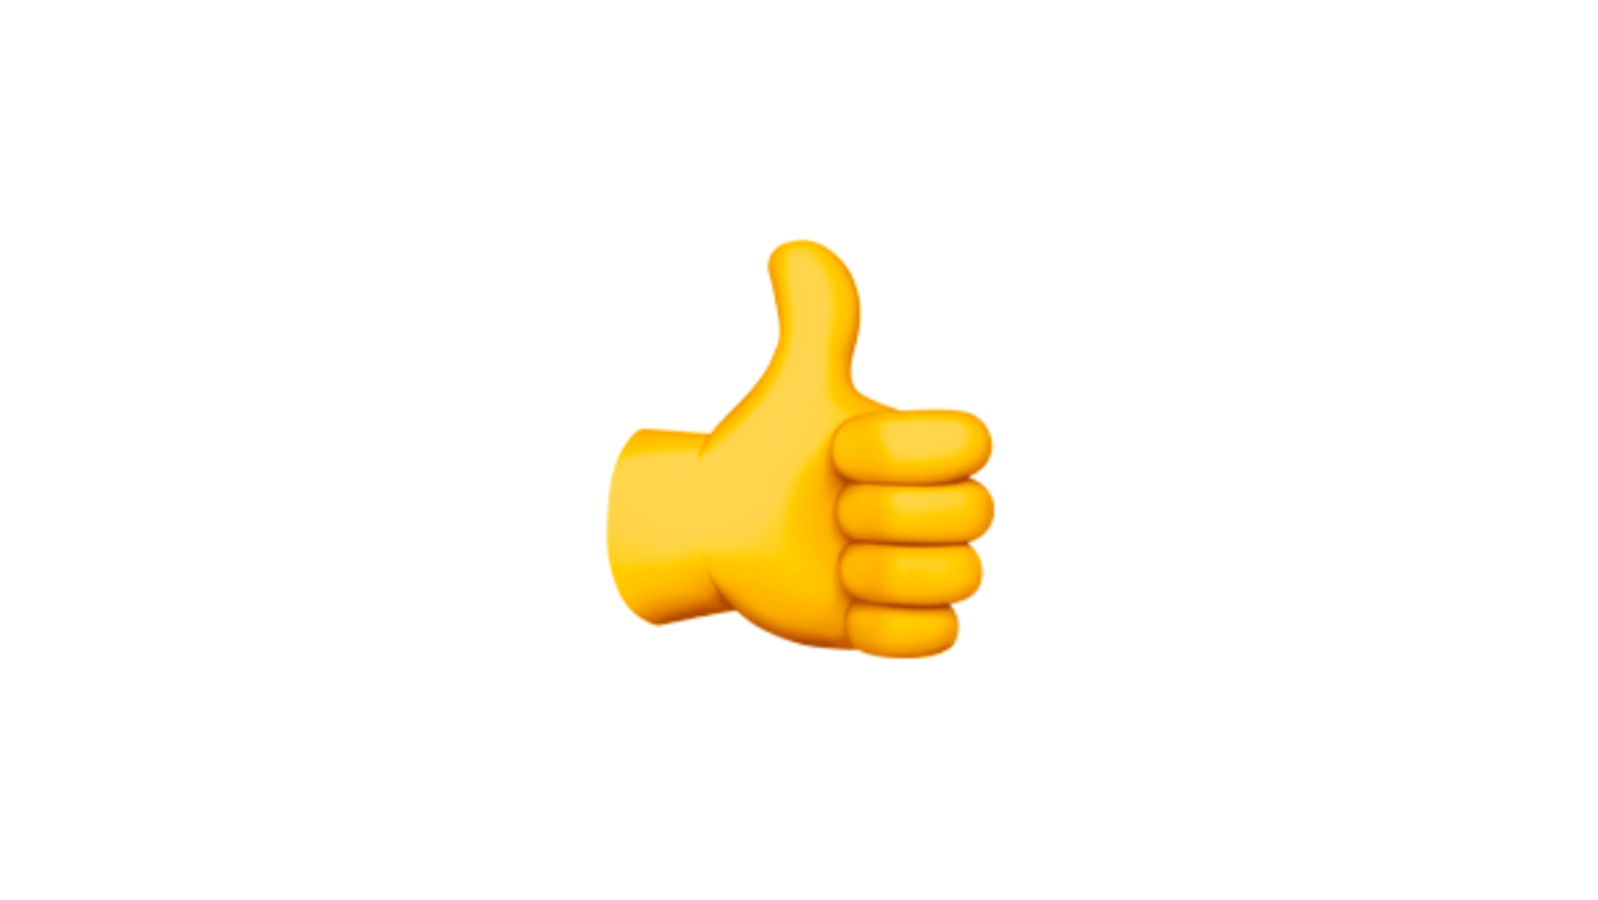 thumbs up emoji canada: Thumbs up emoji to be considered as